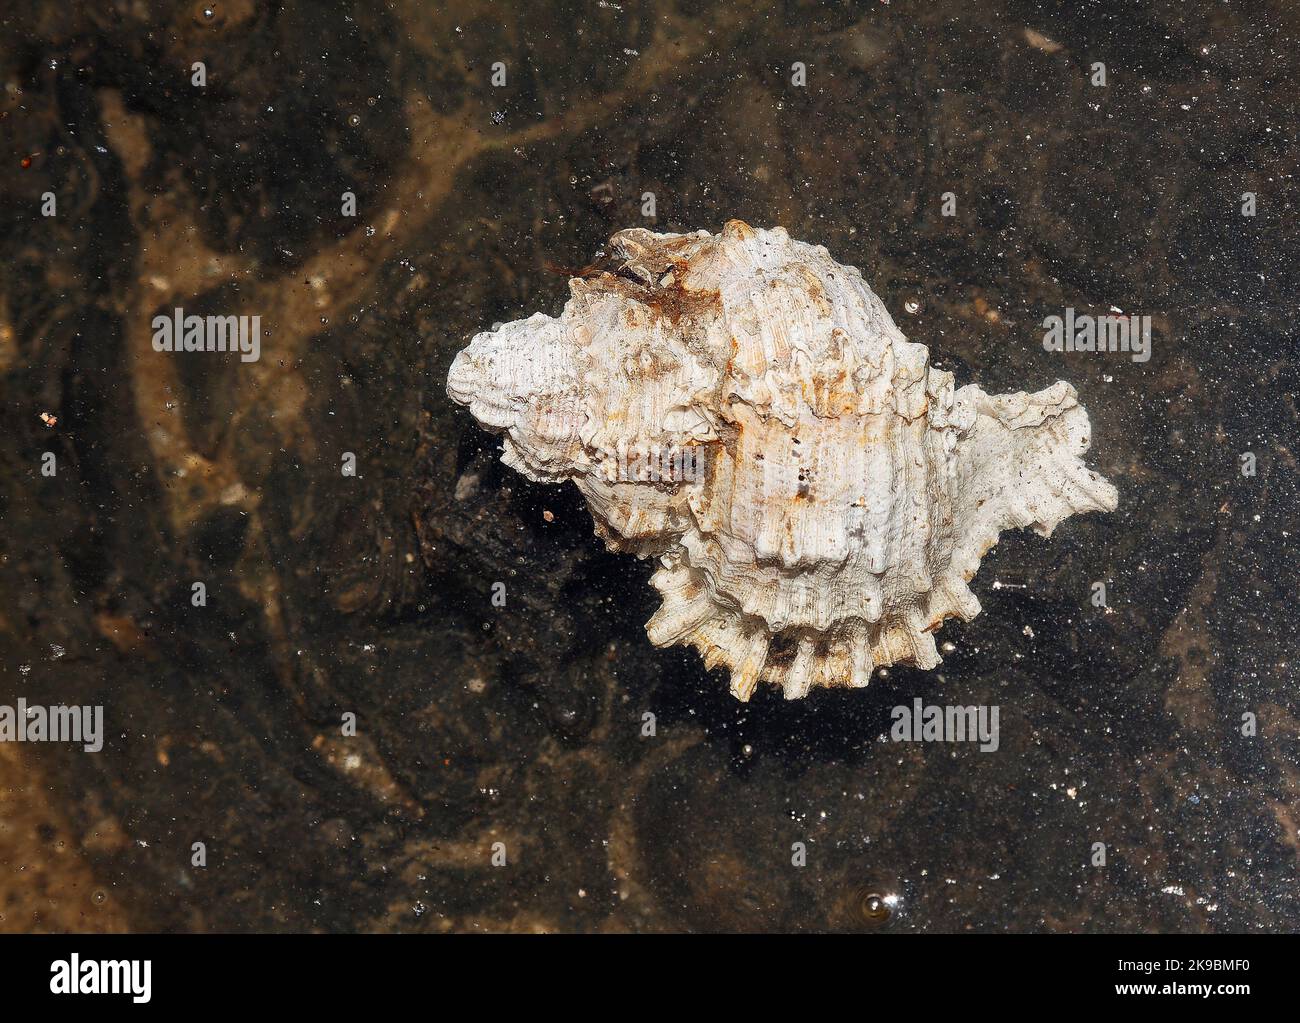 conch shell, in water, nature, sea snails, marine, close-up, South Creek, Oscar Scherer State Park, Florida, Osprey, FL Stock Photo